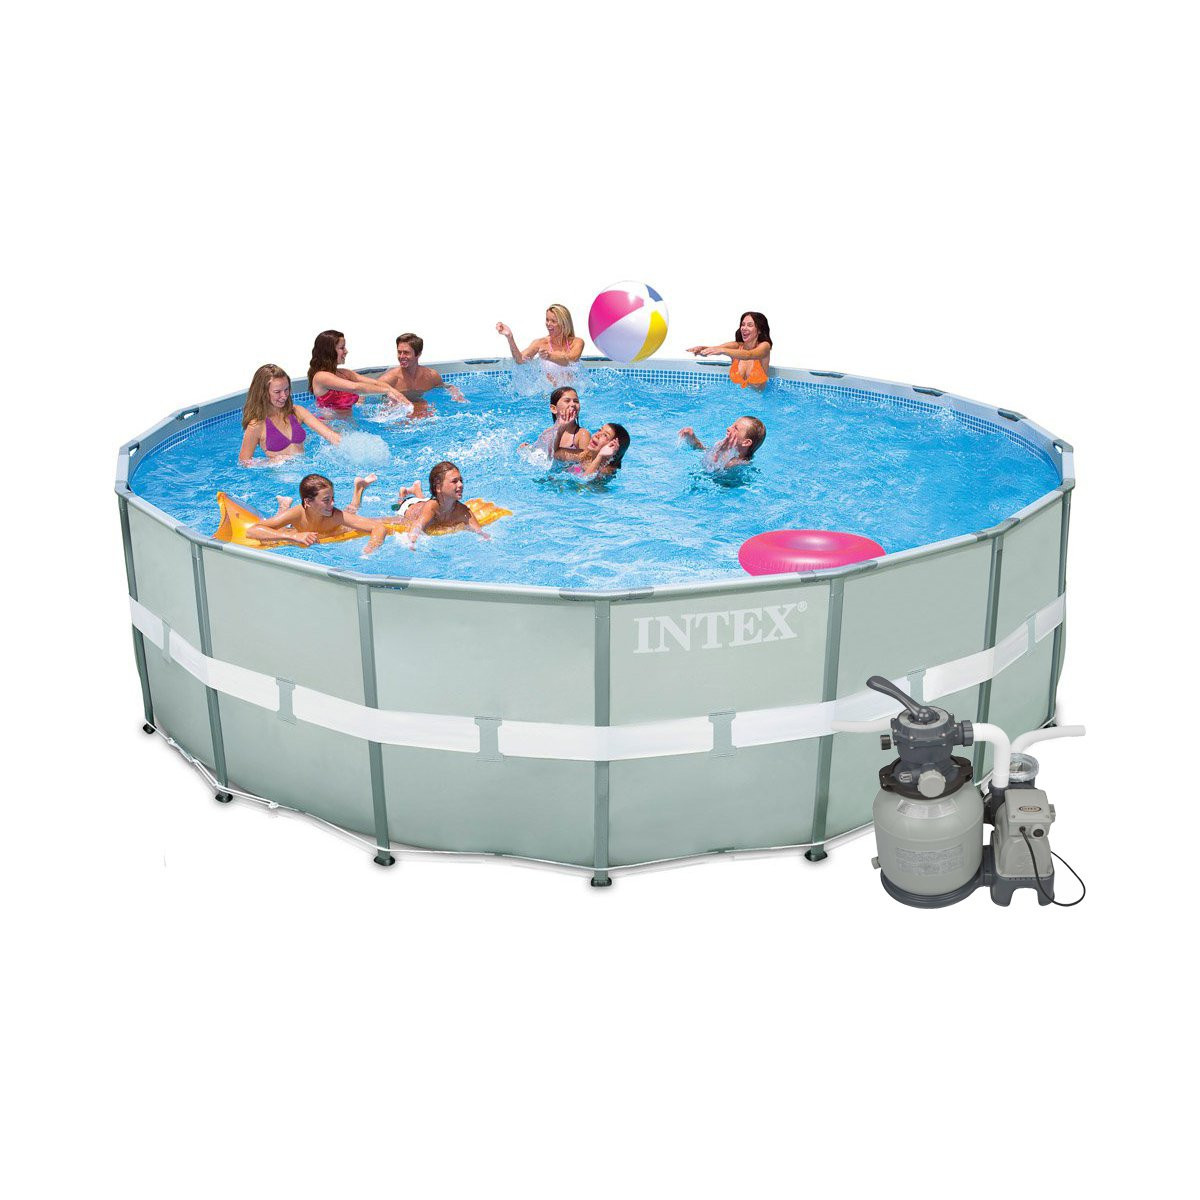 Coleman Above Ground Pool
 Coleman 18 x 48" Power Steel Frame Ground Swimming